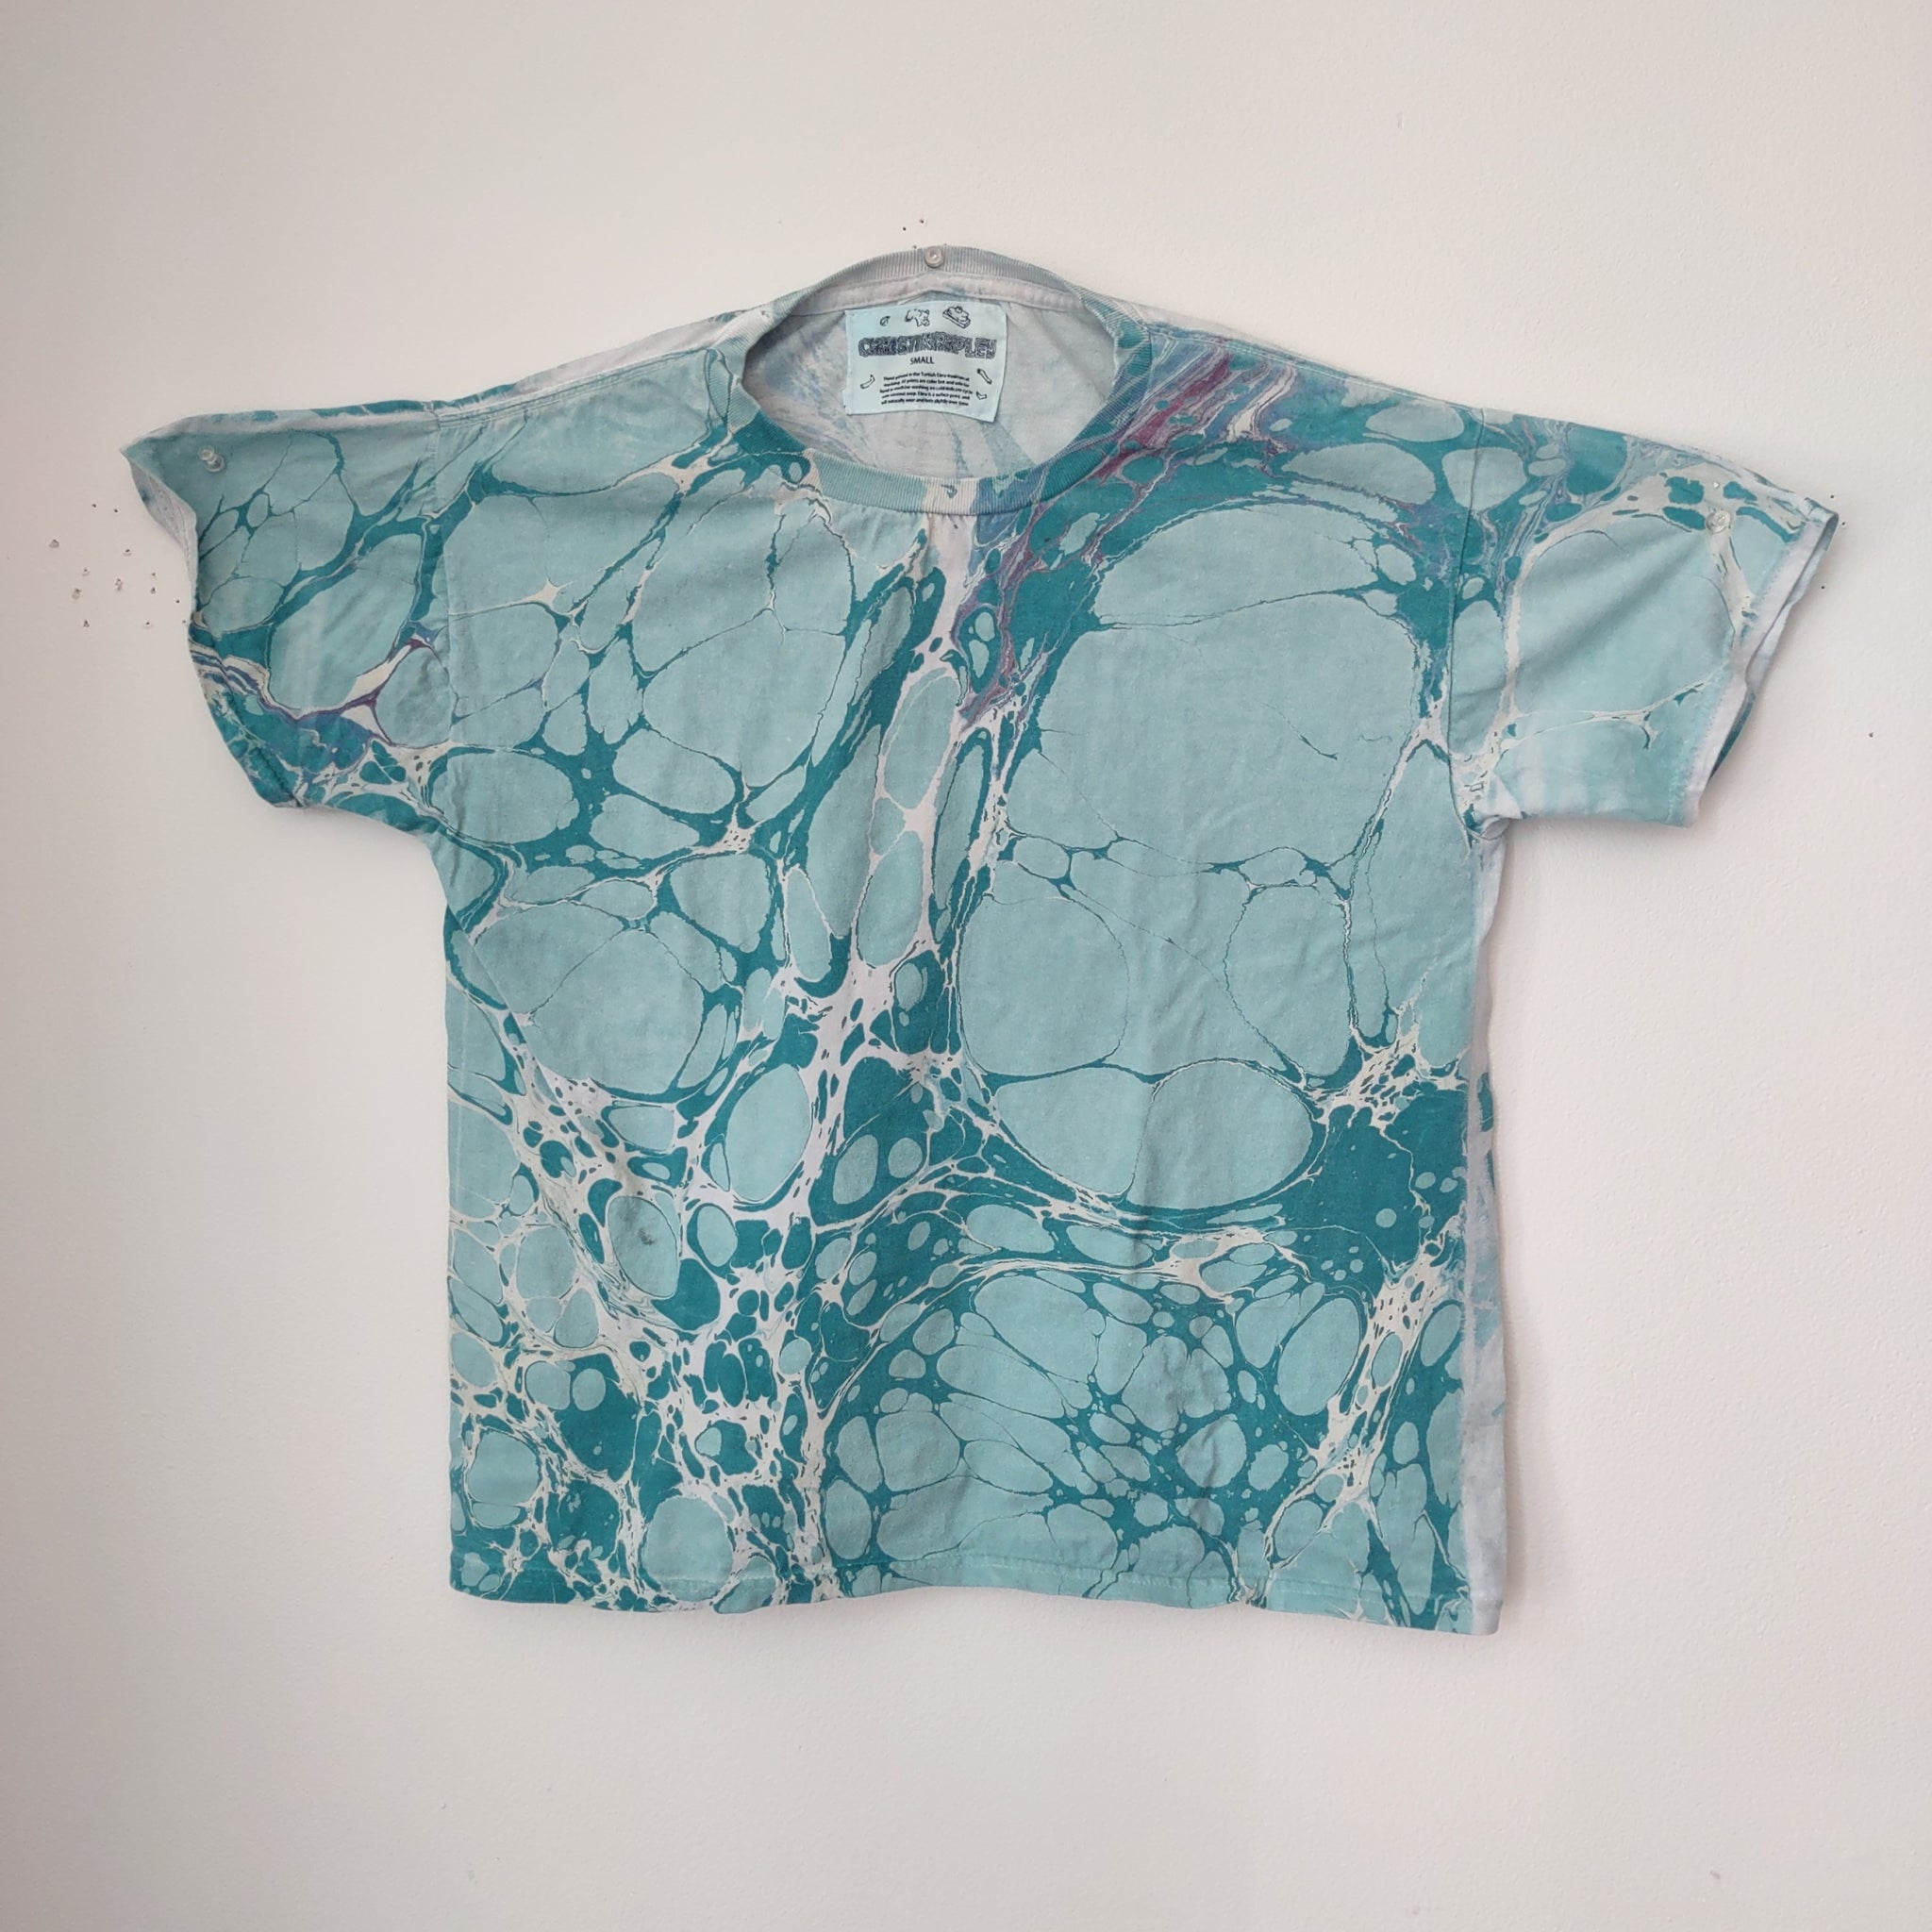 SECONDS S #21// MARBLED T-SHIRT - Adult Small